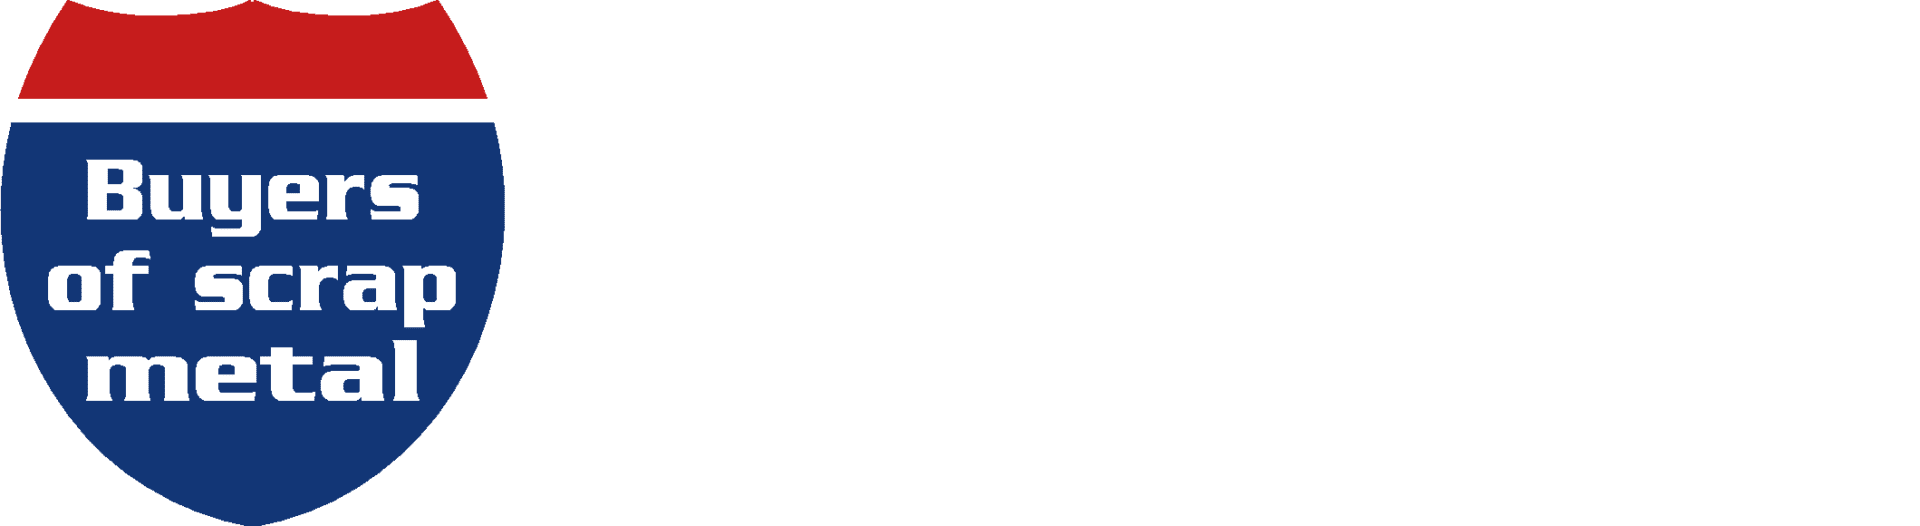 Interstate Metal and Alloy